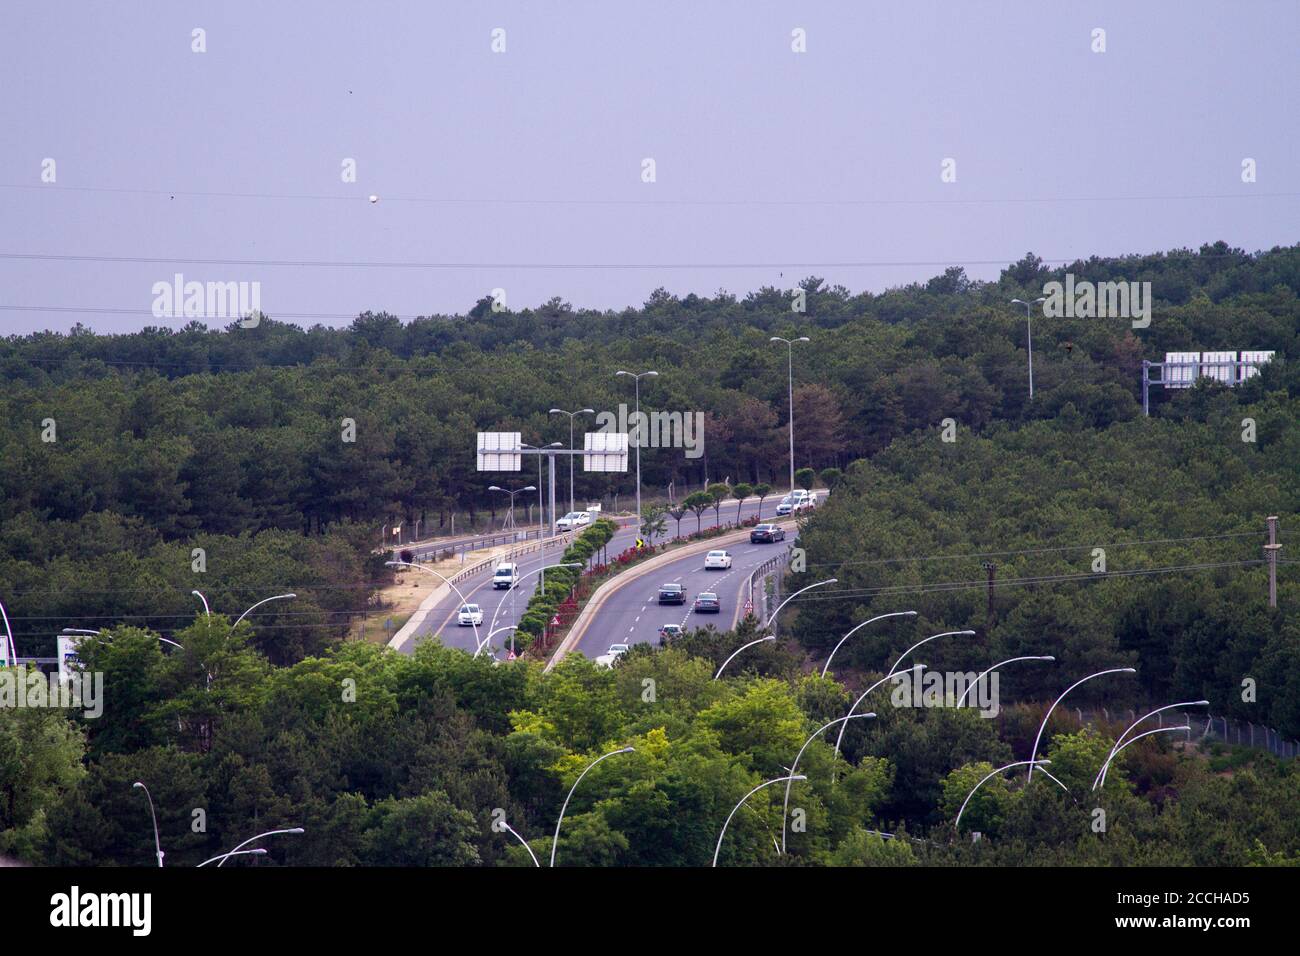 In Ankara's evening traffic, cars are barely moving. Busy morning traffic in Ankara. Stock Photo